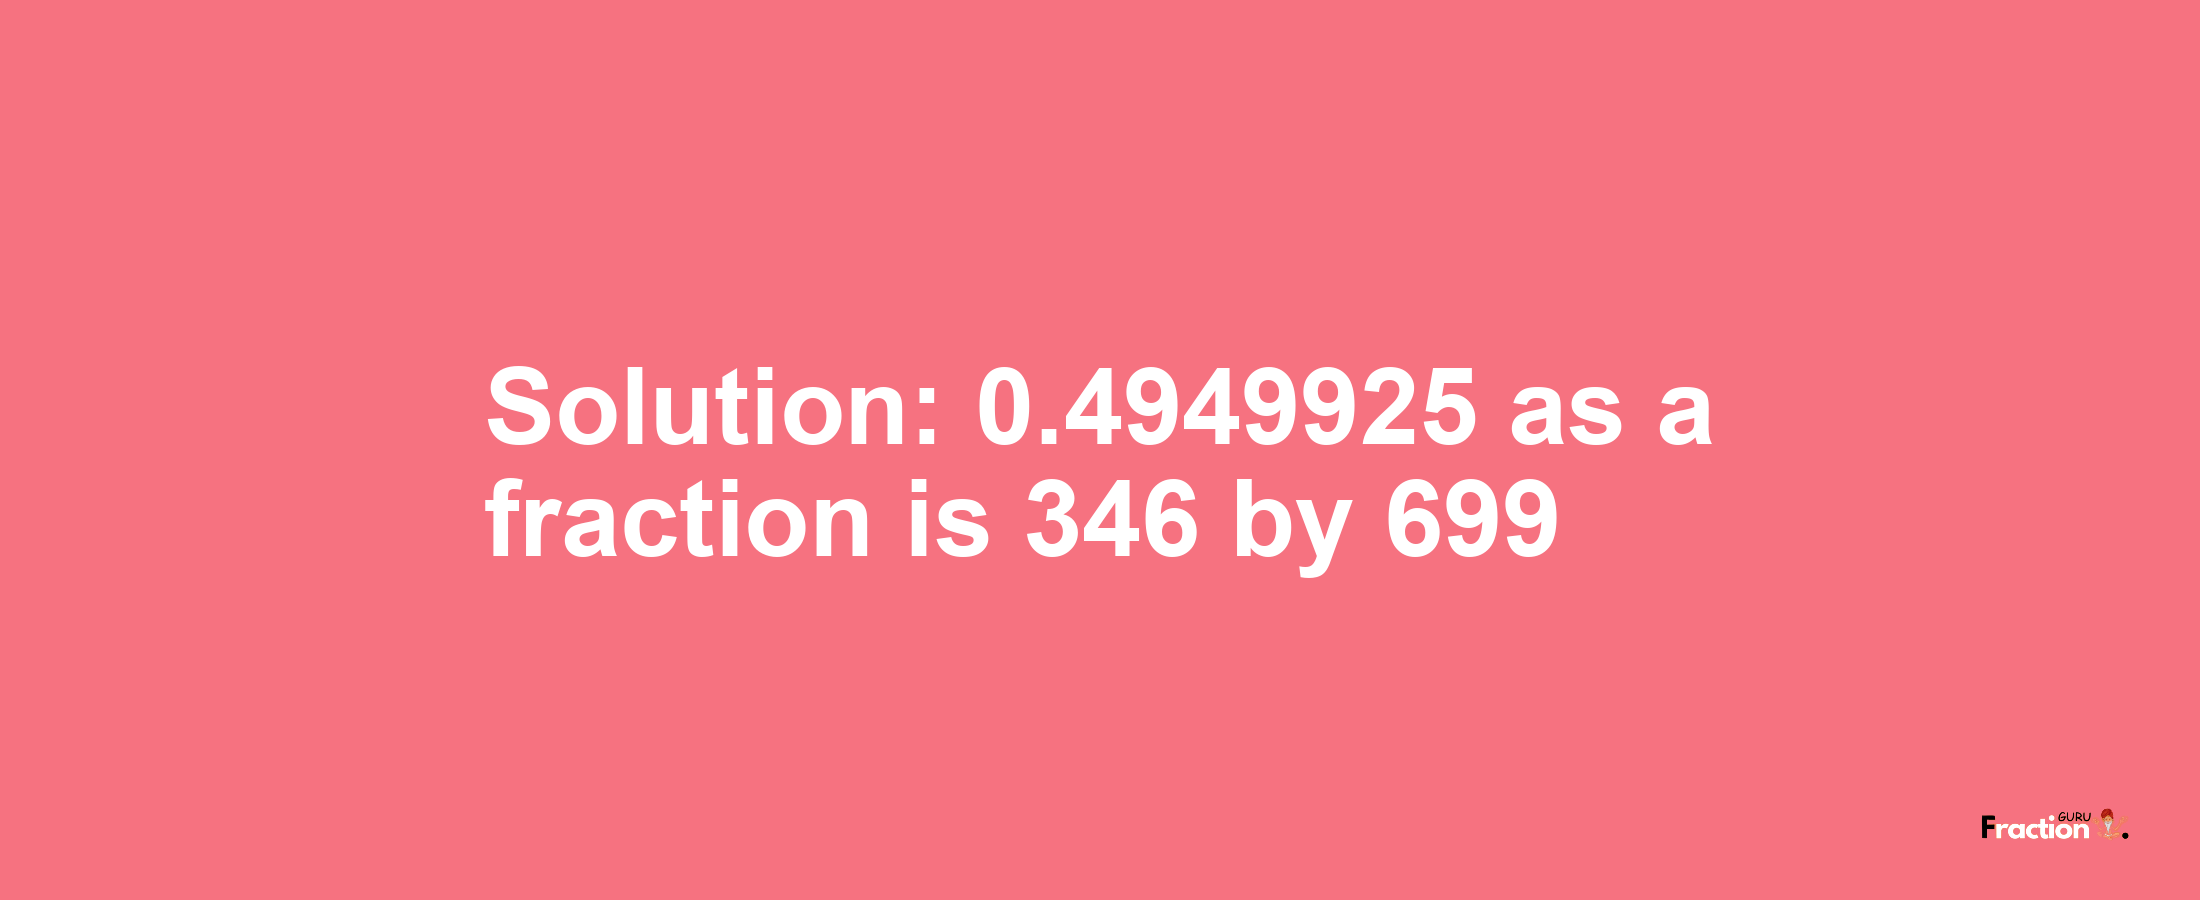 Solution:0.4949925 as a fraction is 346/699